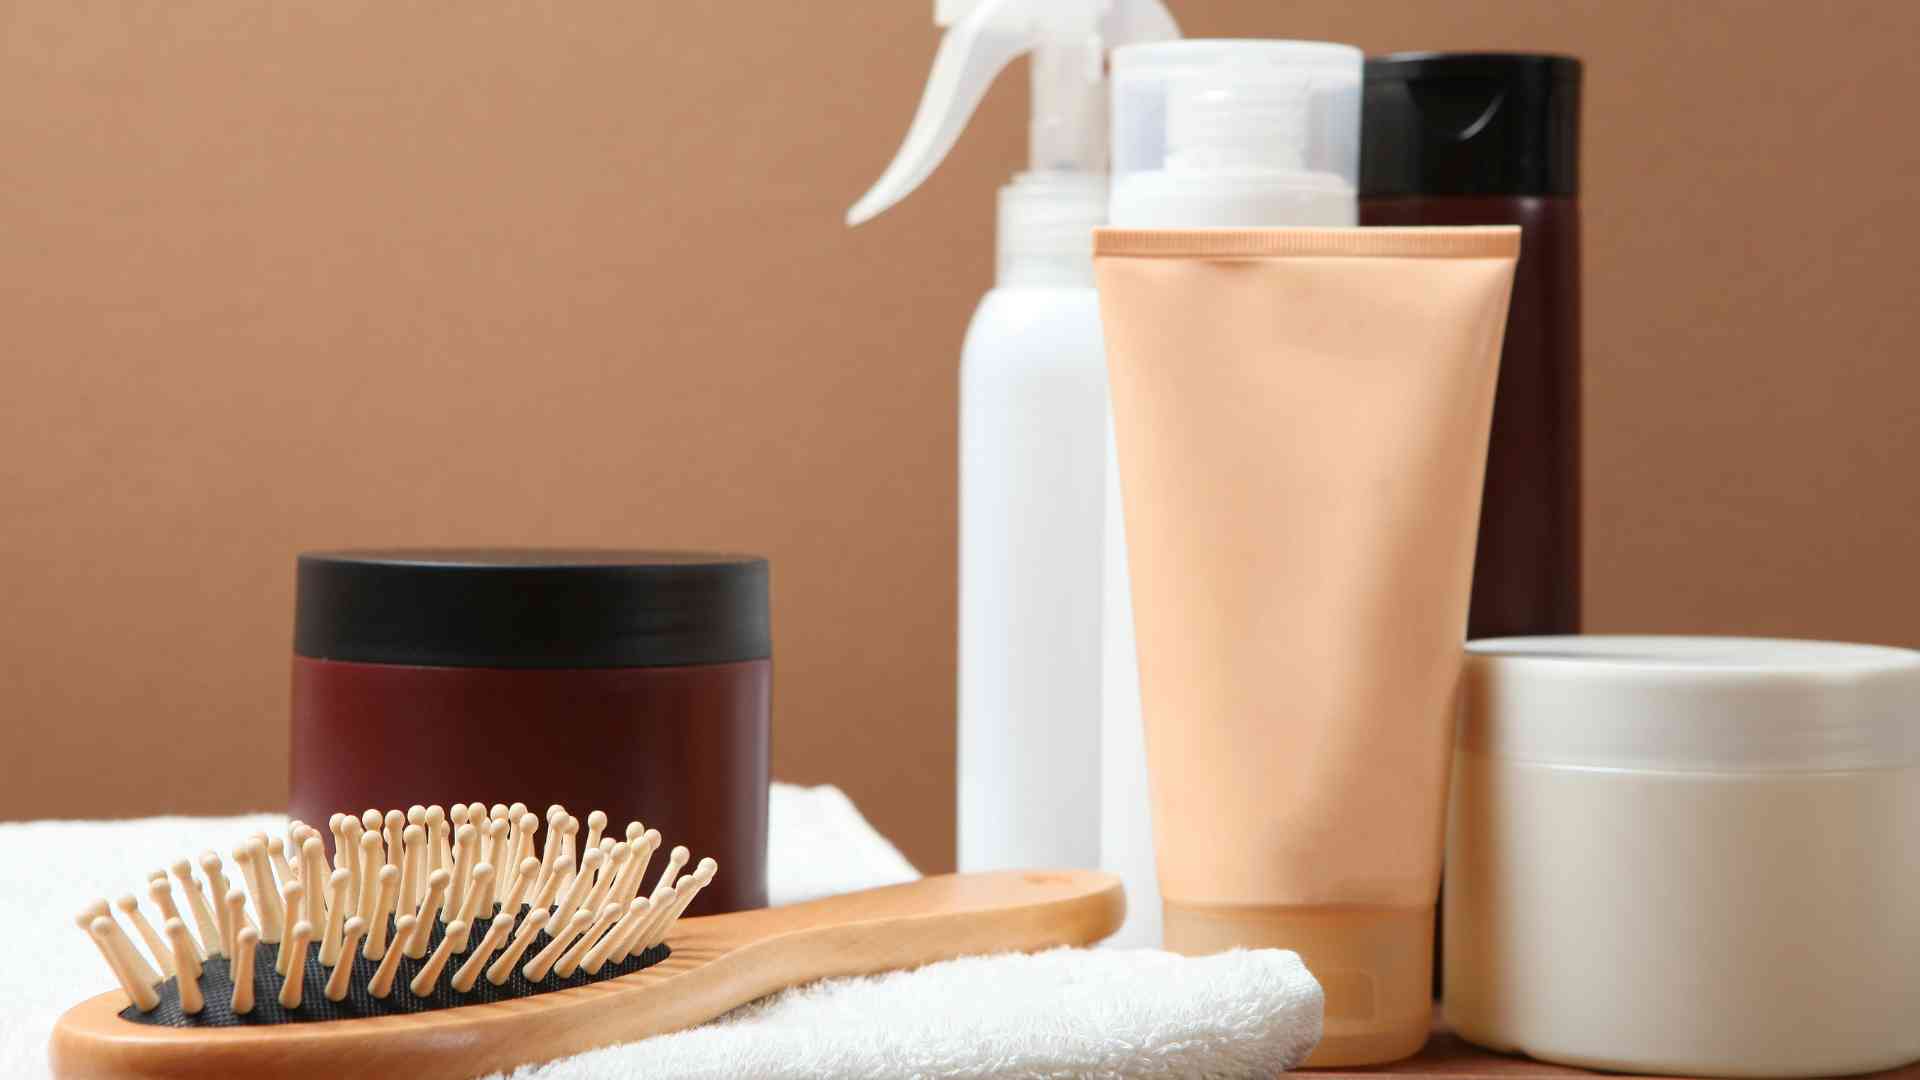 How do hair care products affect hair loss, and are there lesser-known alternatives